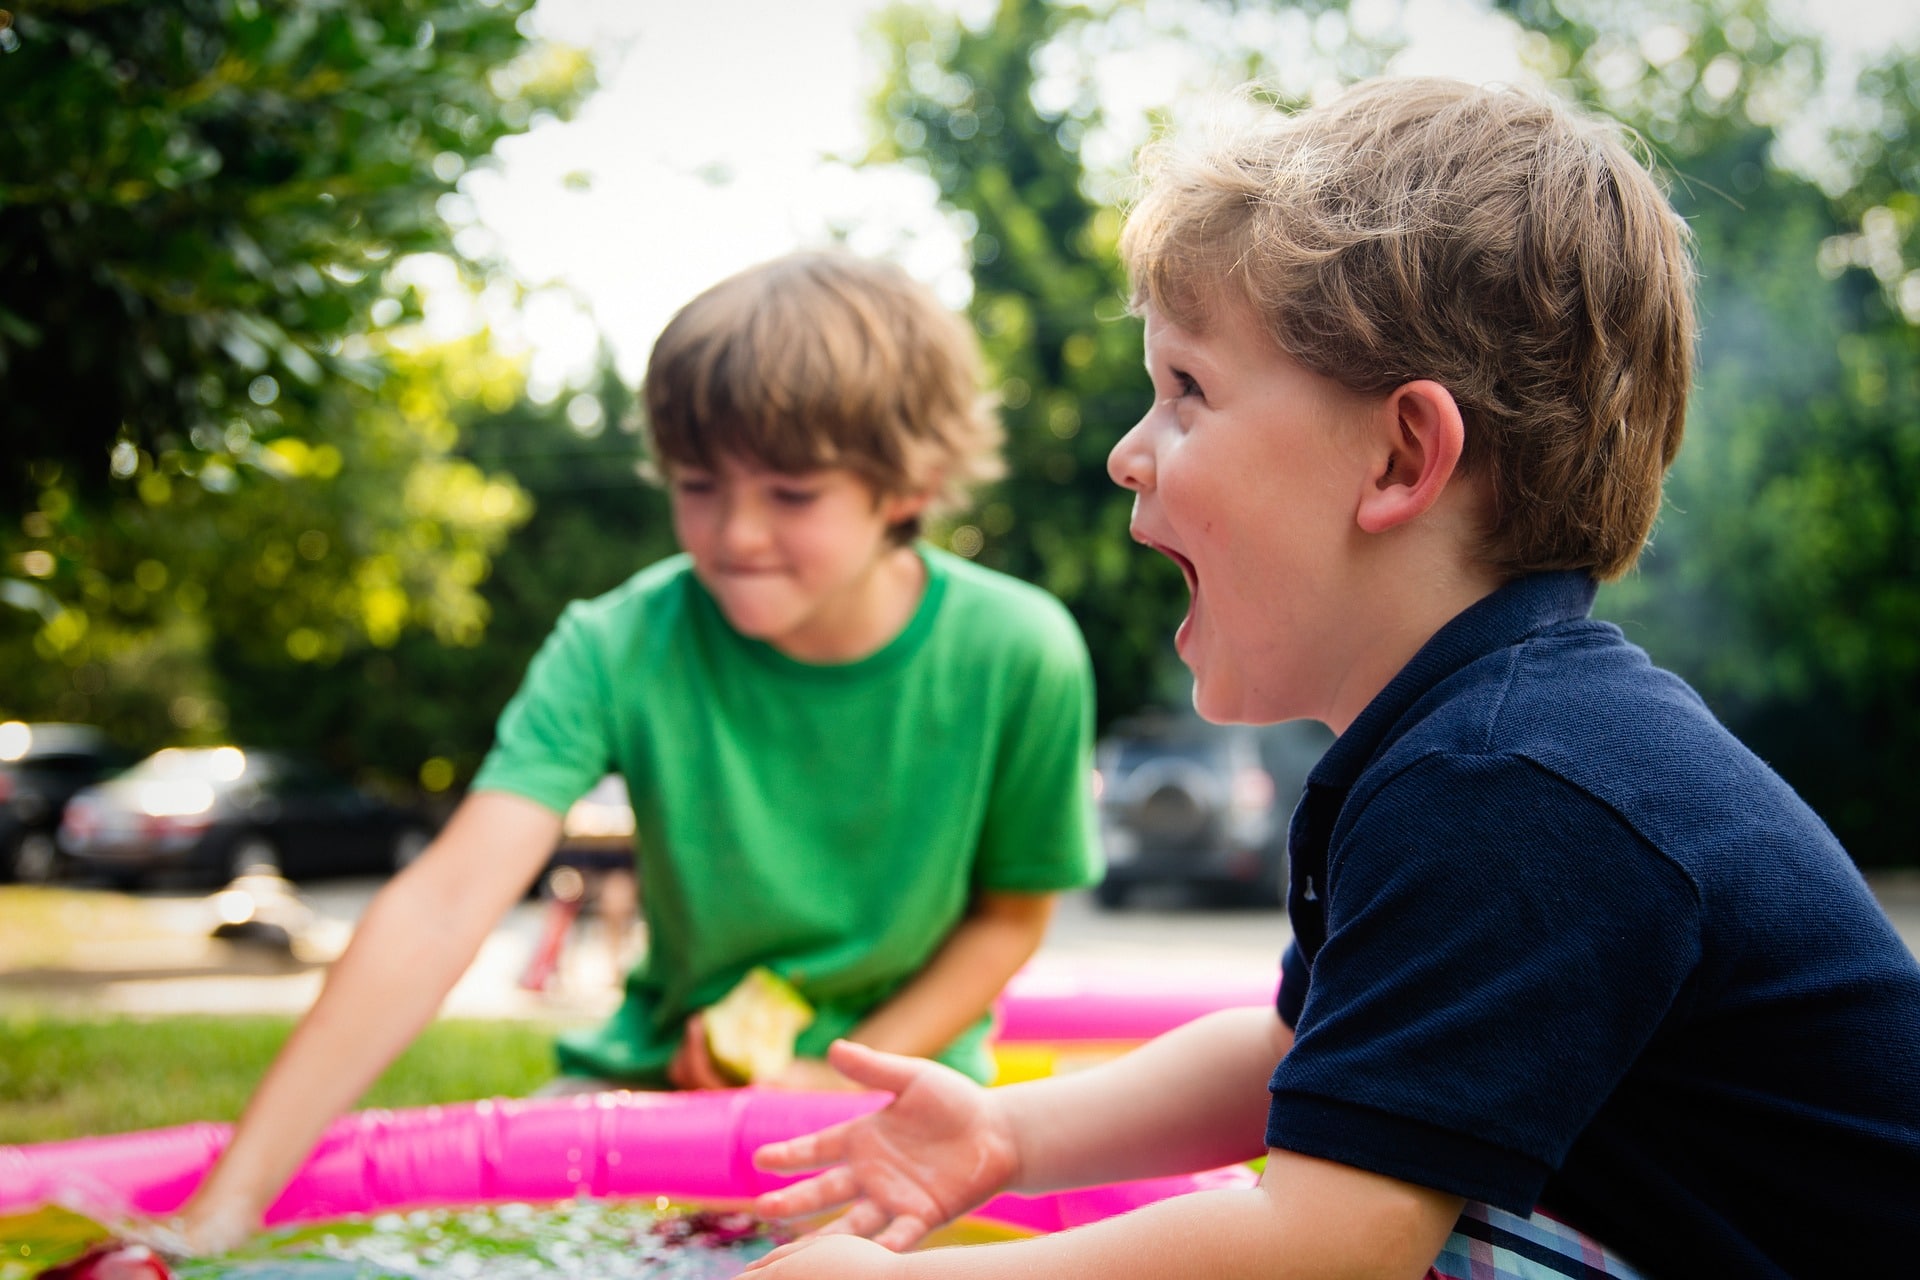 Fun Ways To Motivate Kids To Play Outdoors-AlignThoughts